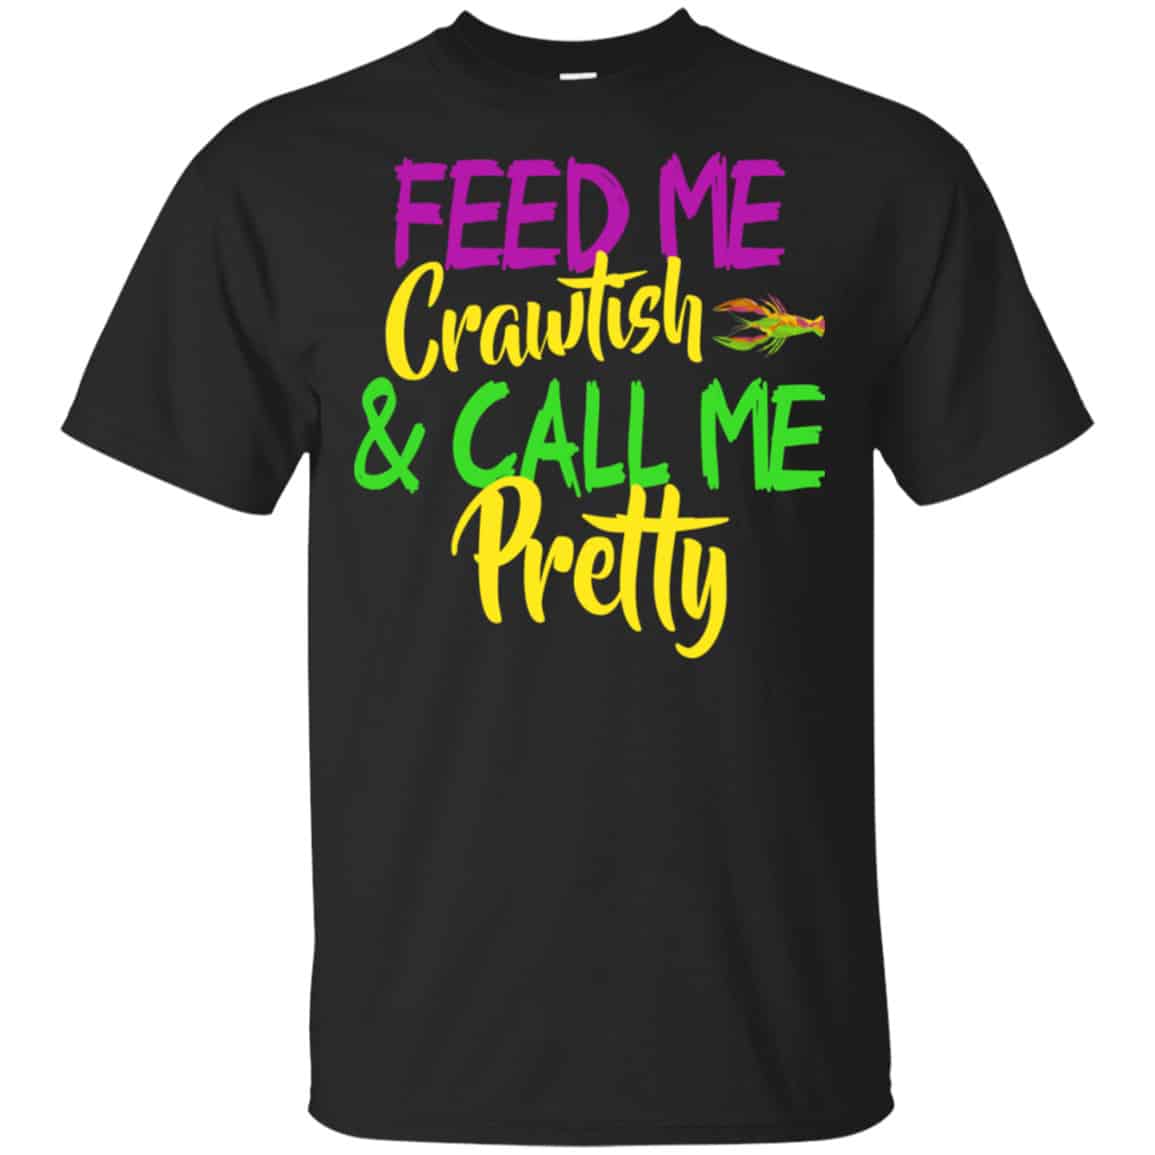 Mardi Gras T-shirt Feed Me Crawfish And Tell Me I'm Pretty Funny New Orleans Tee Carnival Shirt Crawfish Shirt Mardi Gras Gifts For Her